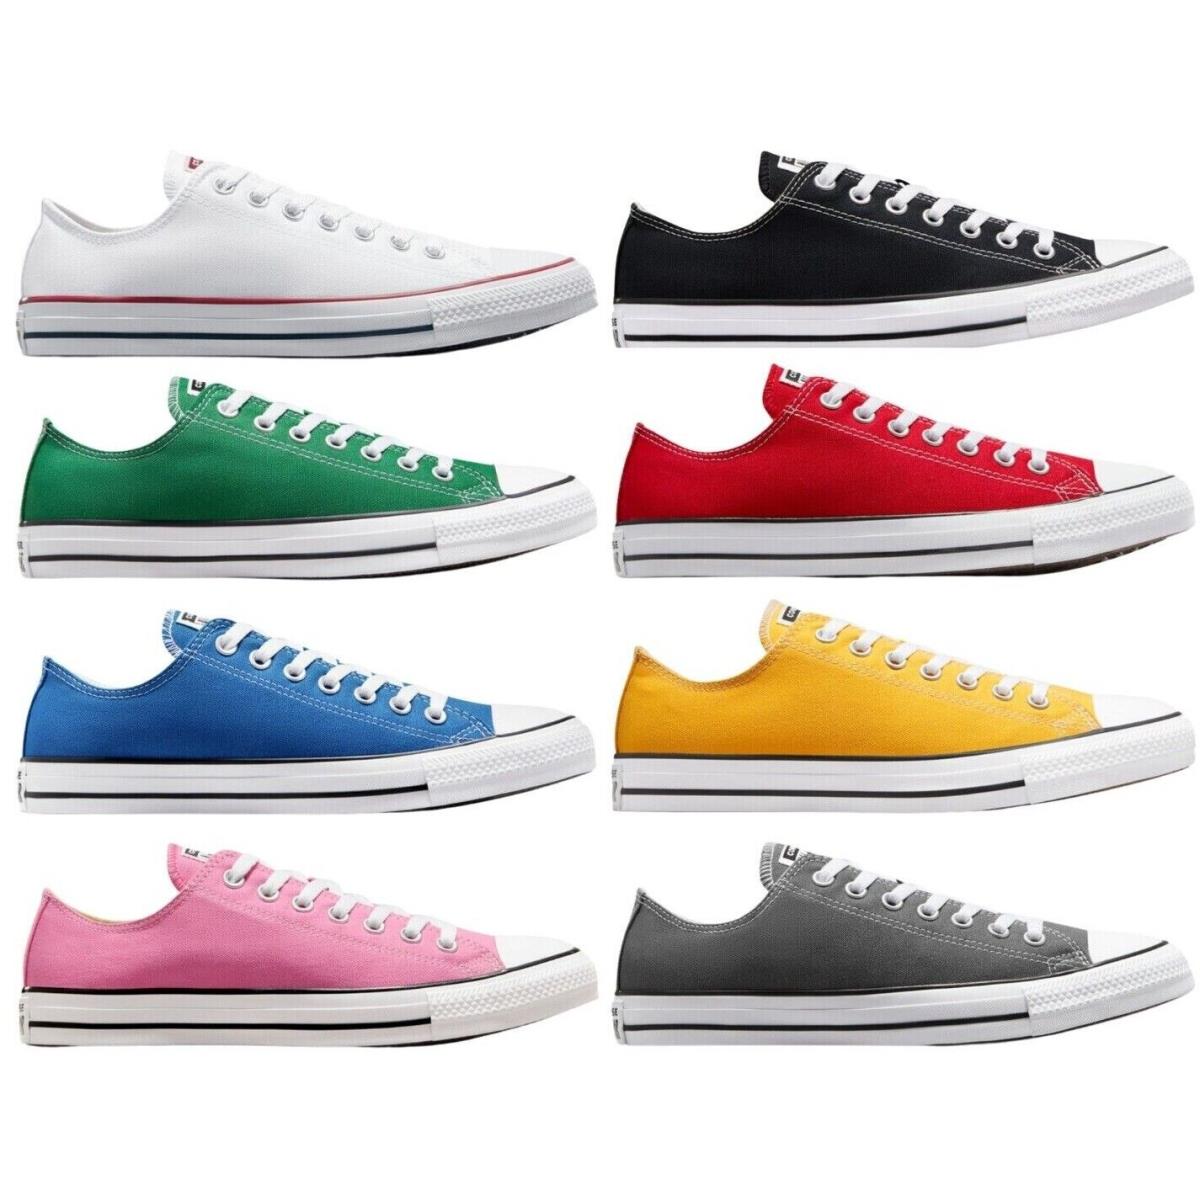 Converse Chuck Taylor All Star Unisex Low Top Shoe All Colors US Sizes 5-12